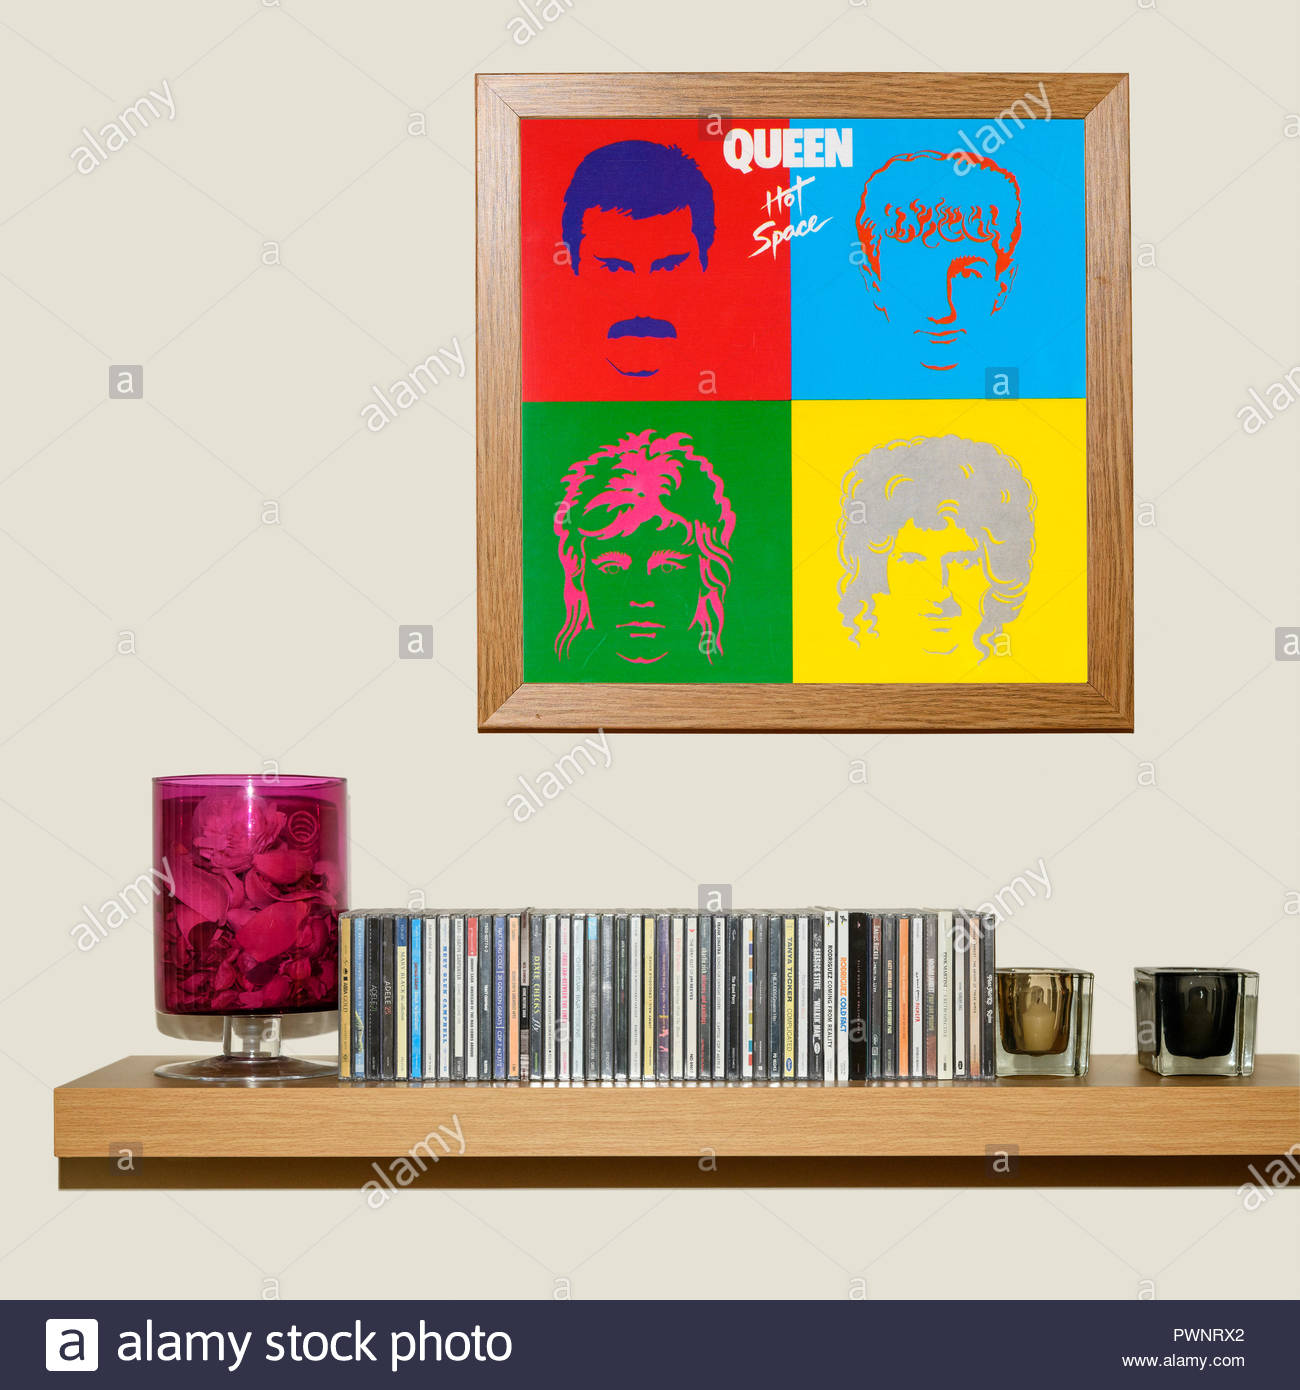 Cd Collection And Framed Queen Album Hot Space England Stock Photo Alamy